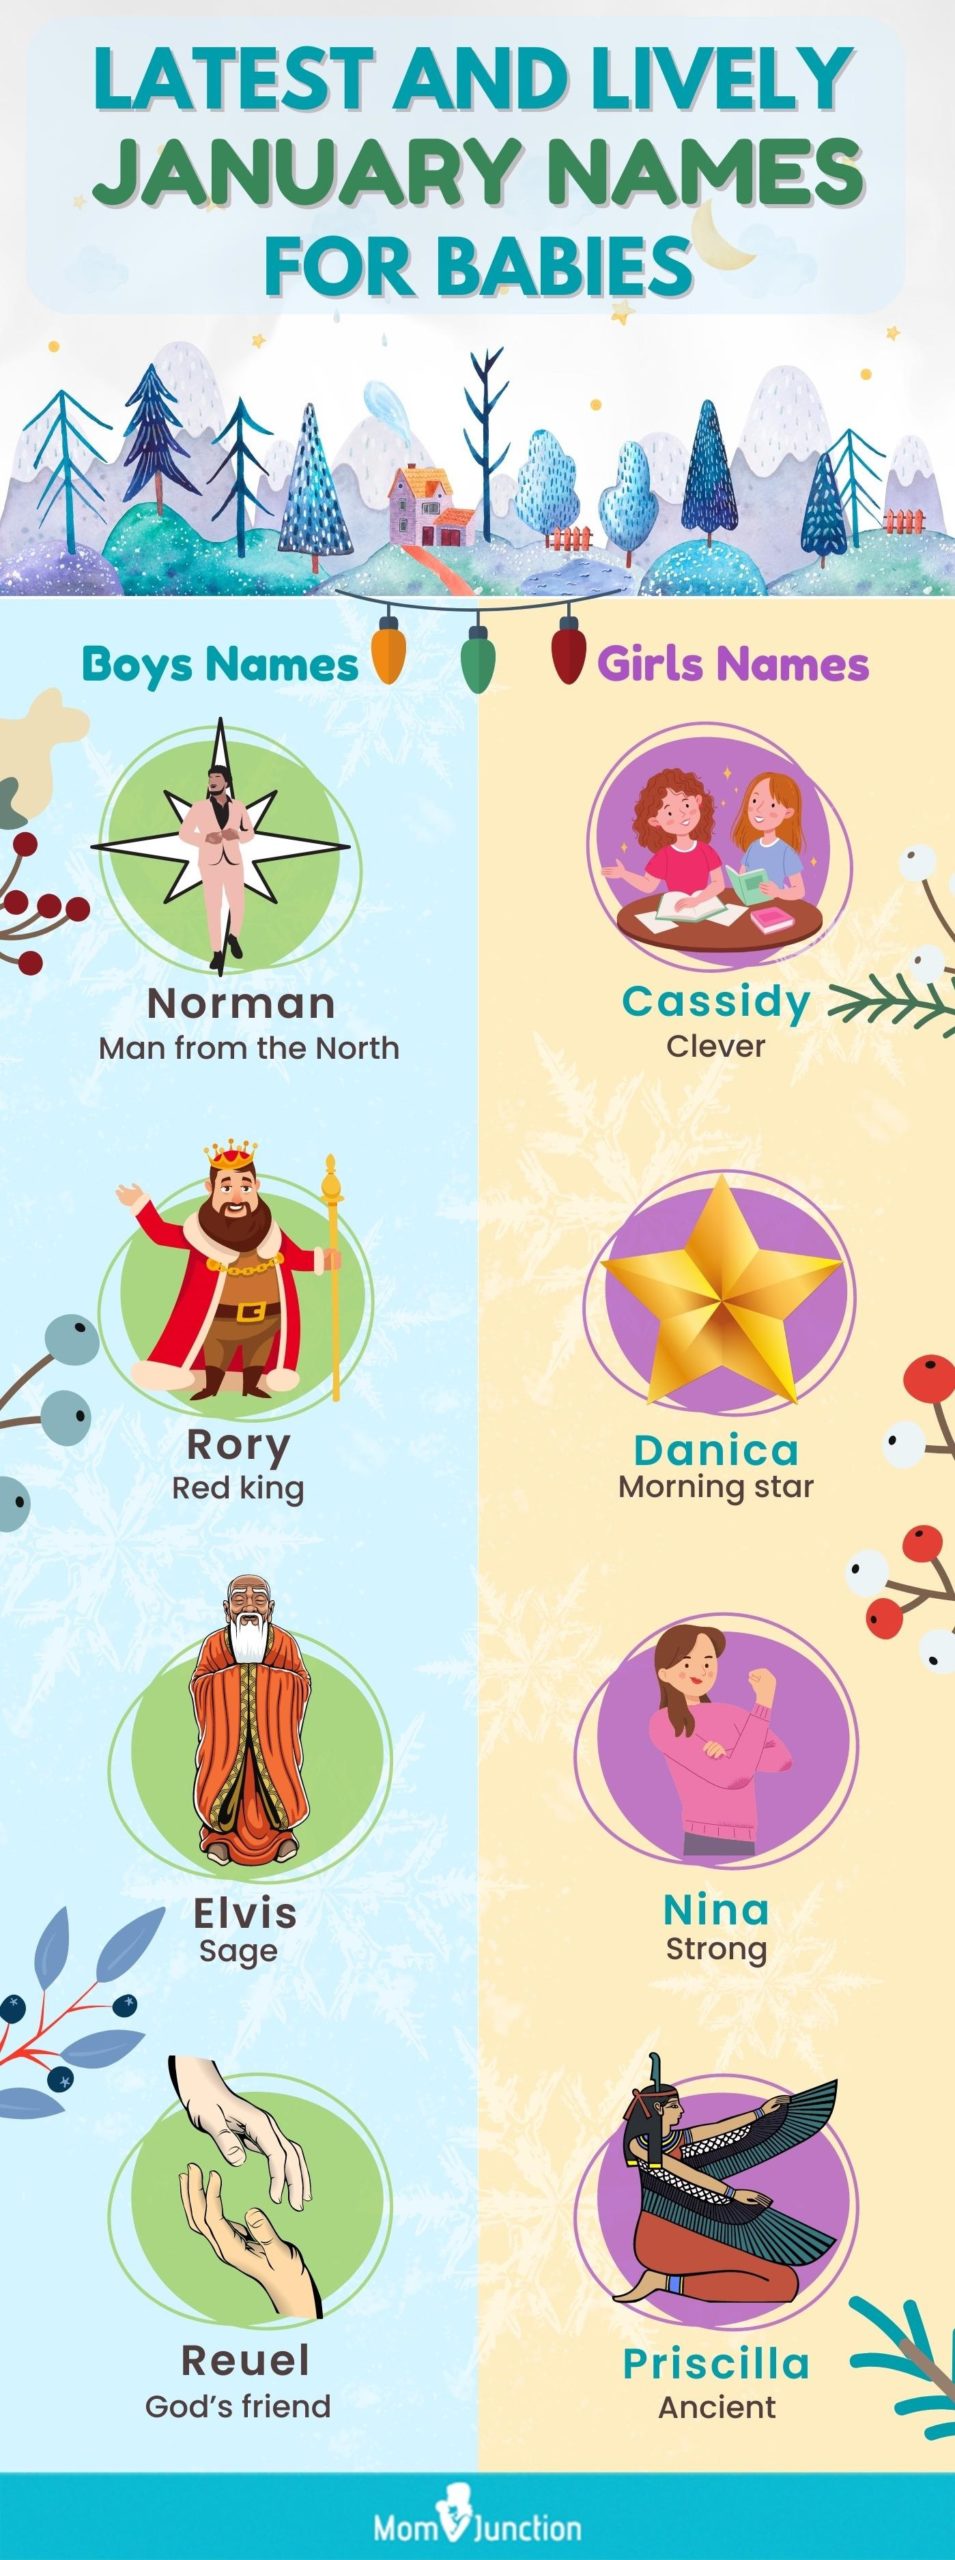 latest and lively january names for babies (infographic)